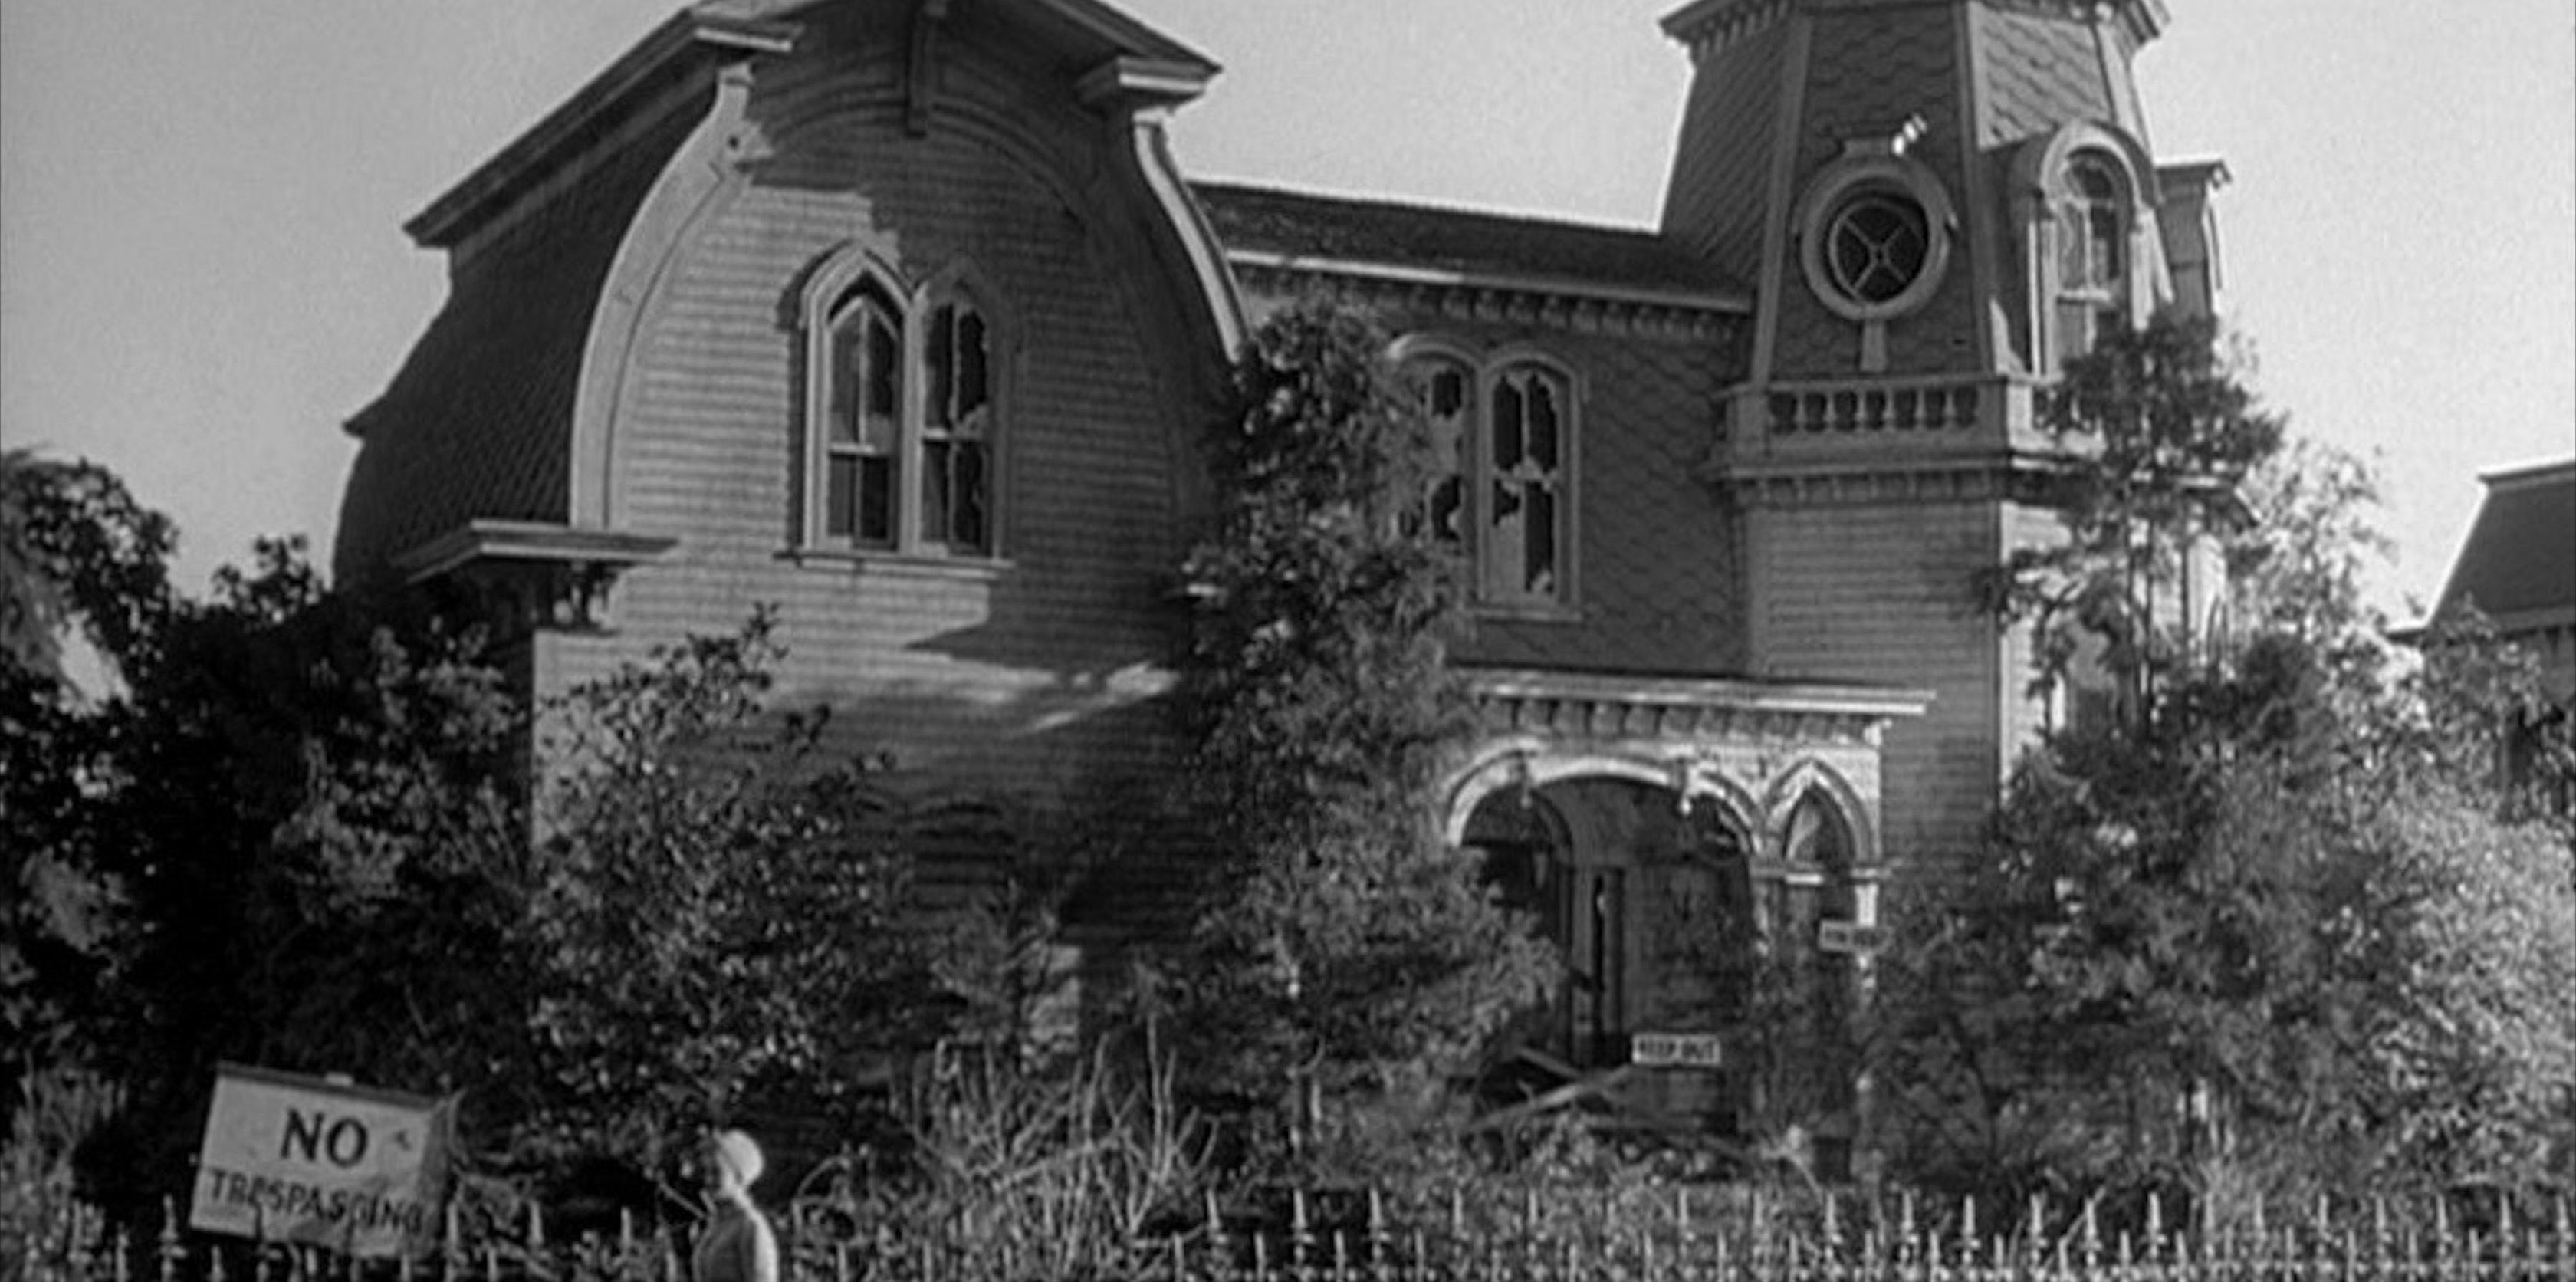 The Munsters House in Leave it to Beaver